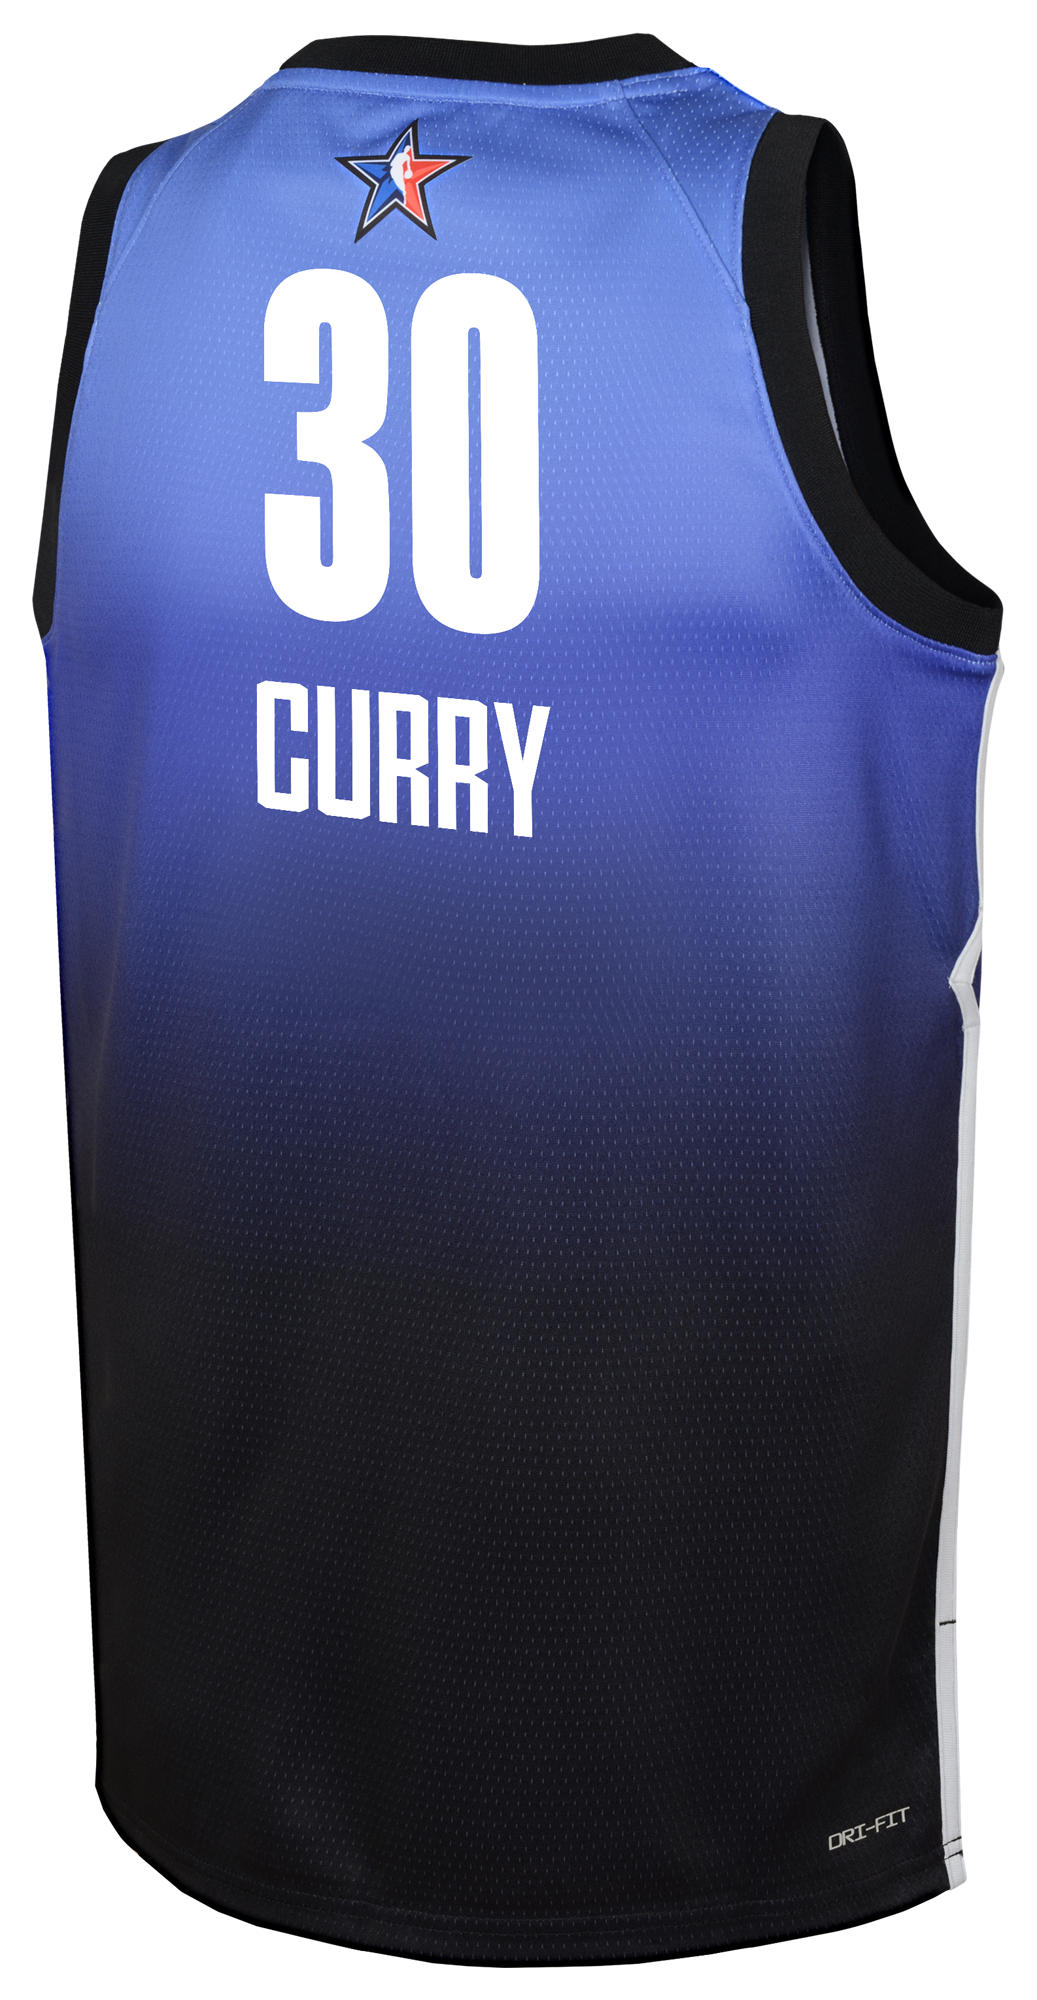 stephen curry jersey youth 10-12 cheap